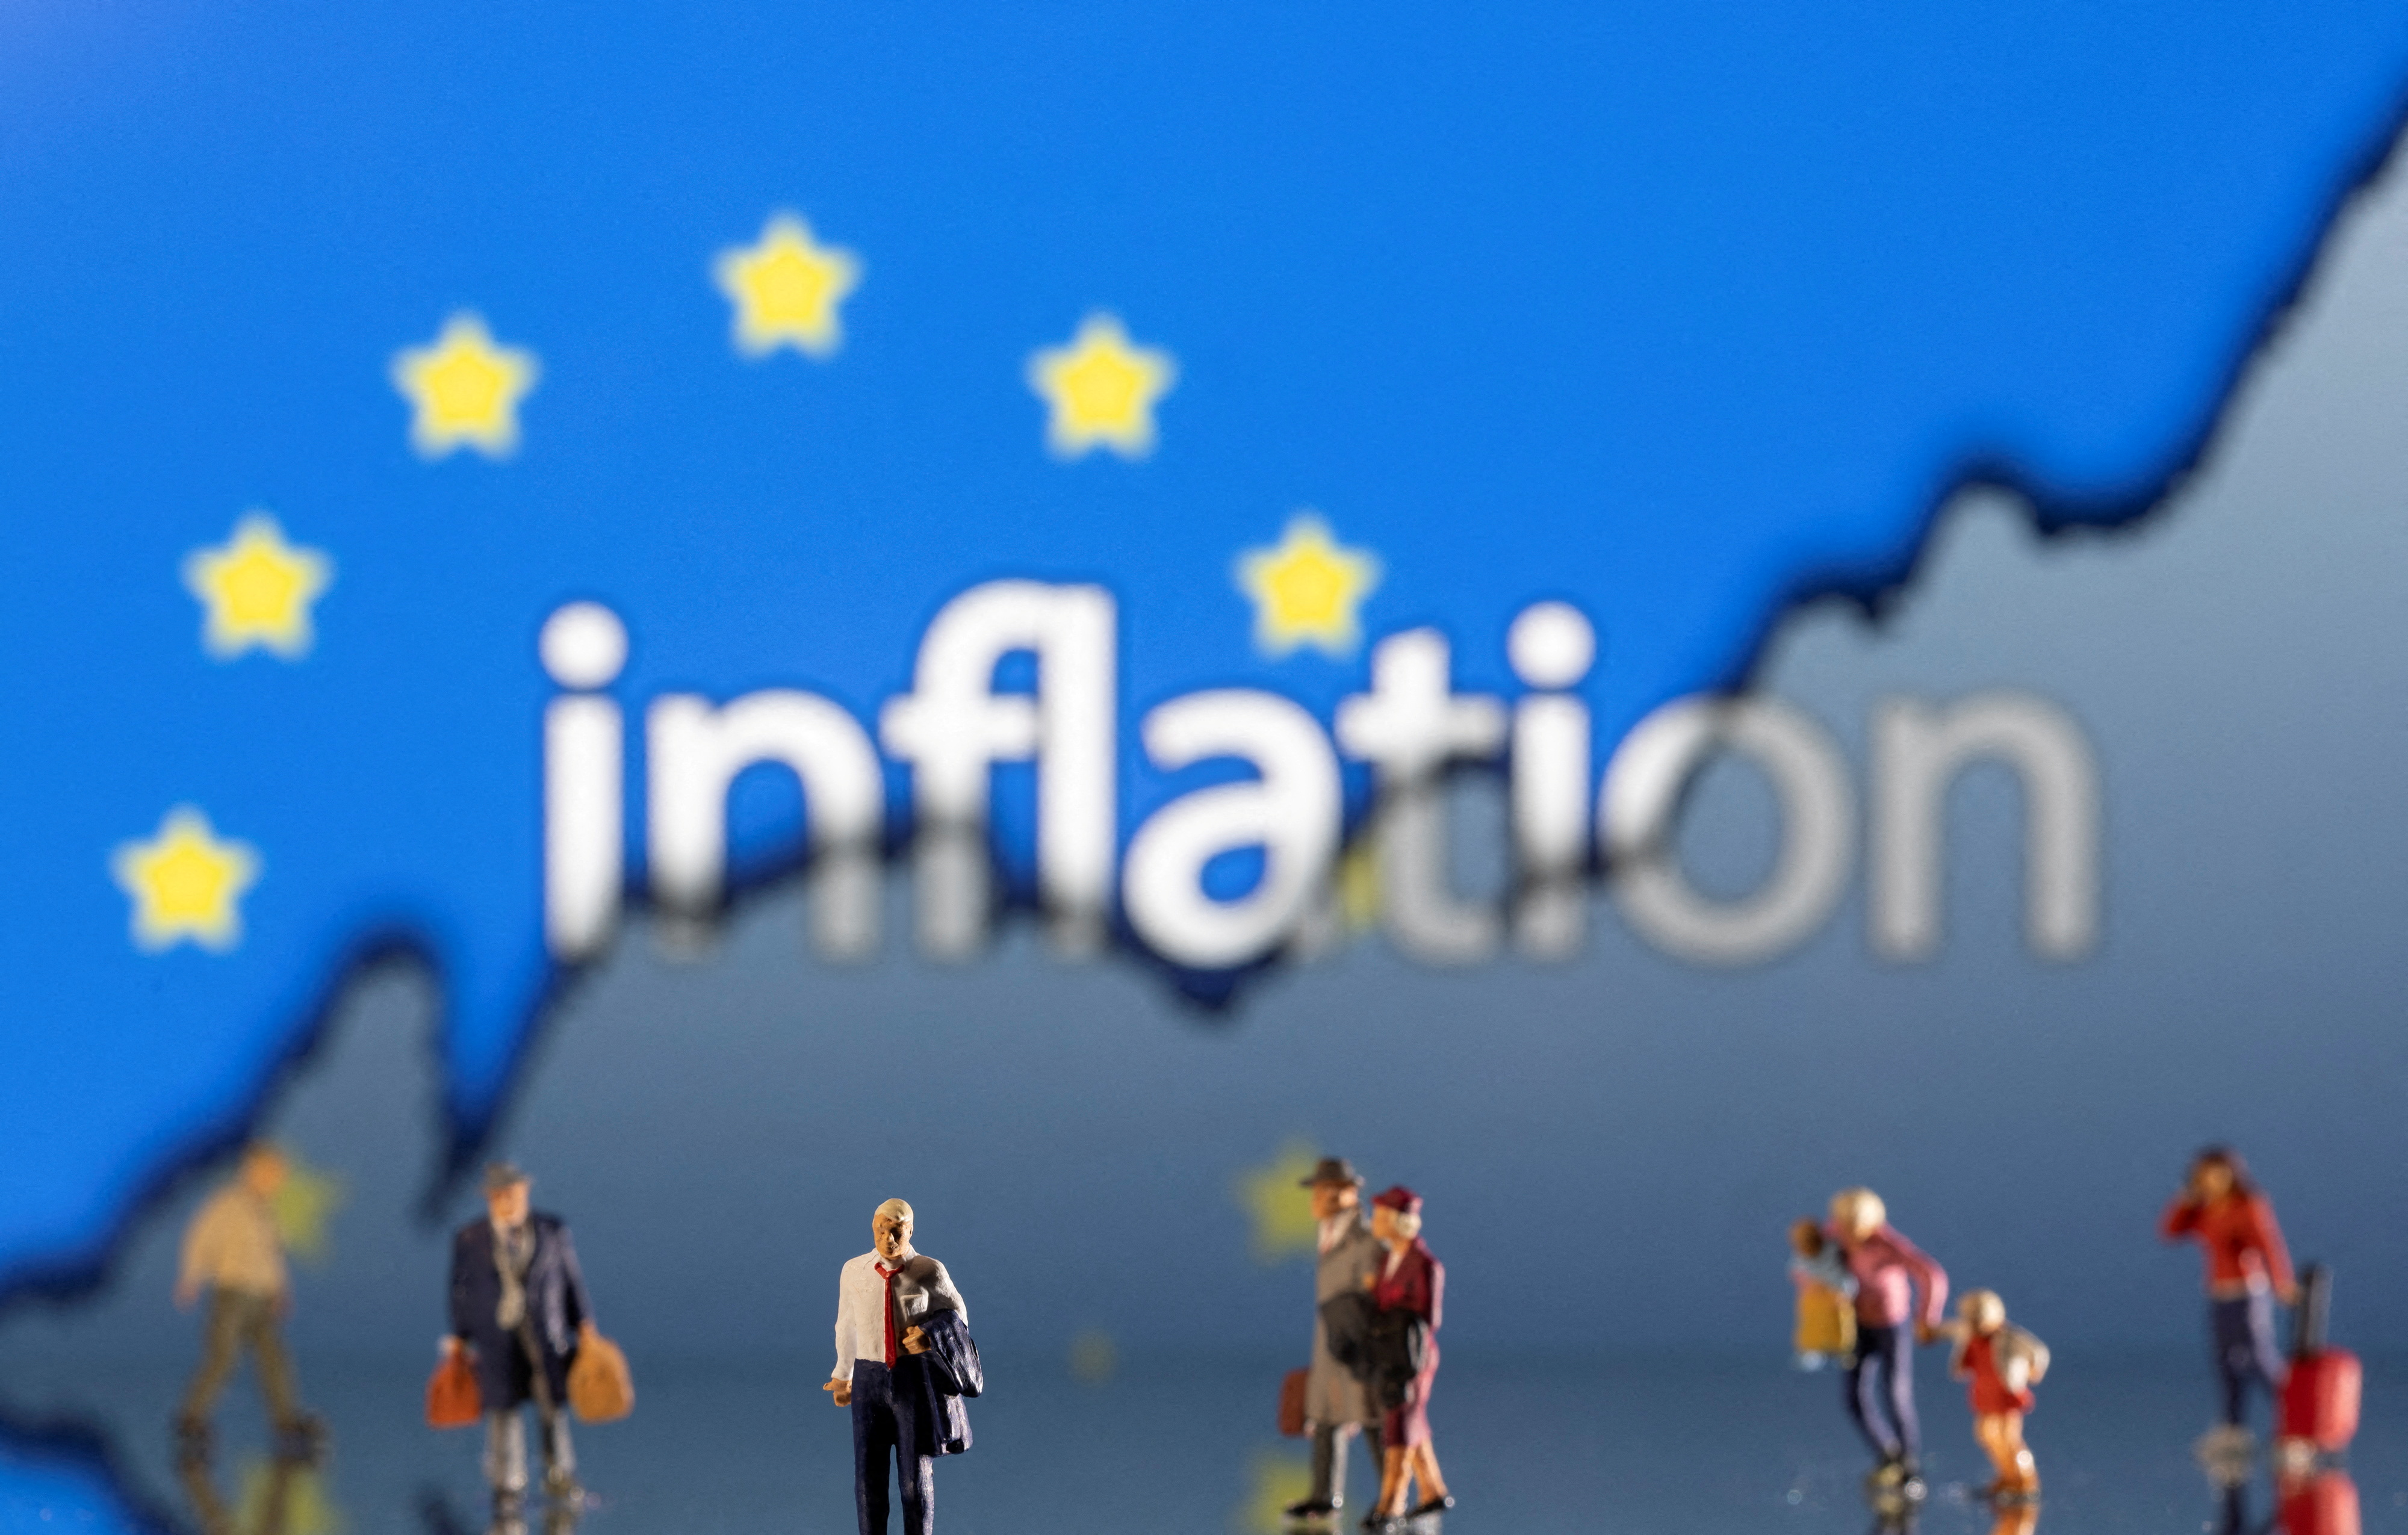  "Inflation", EU flag and rising stock graph